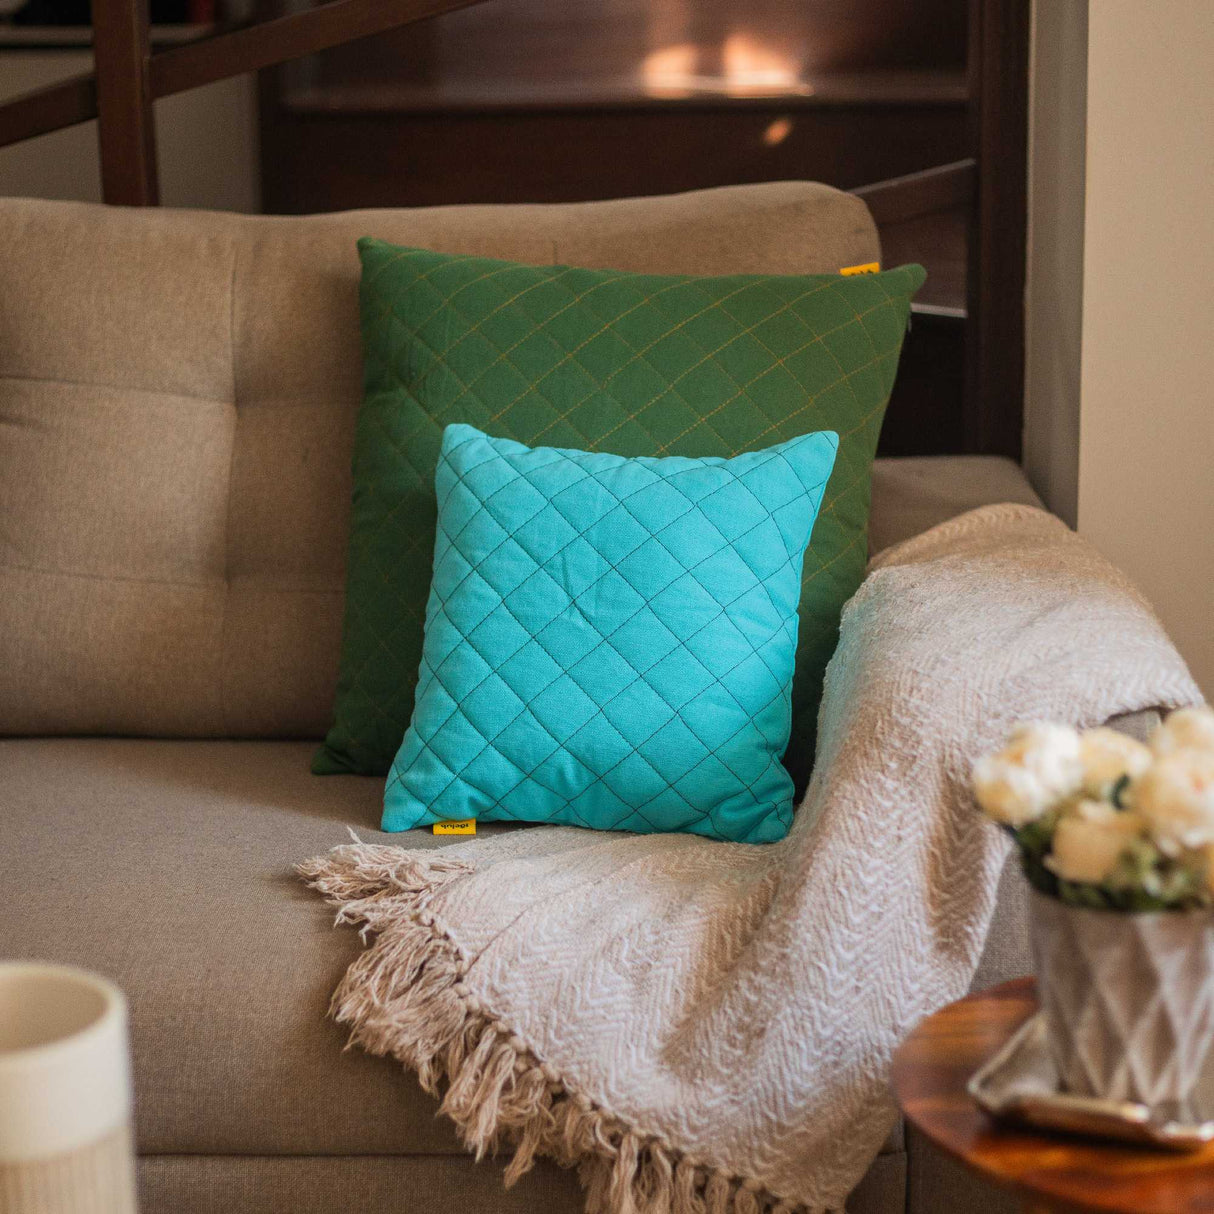 Green and blue cushion for decor